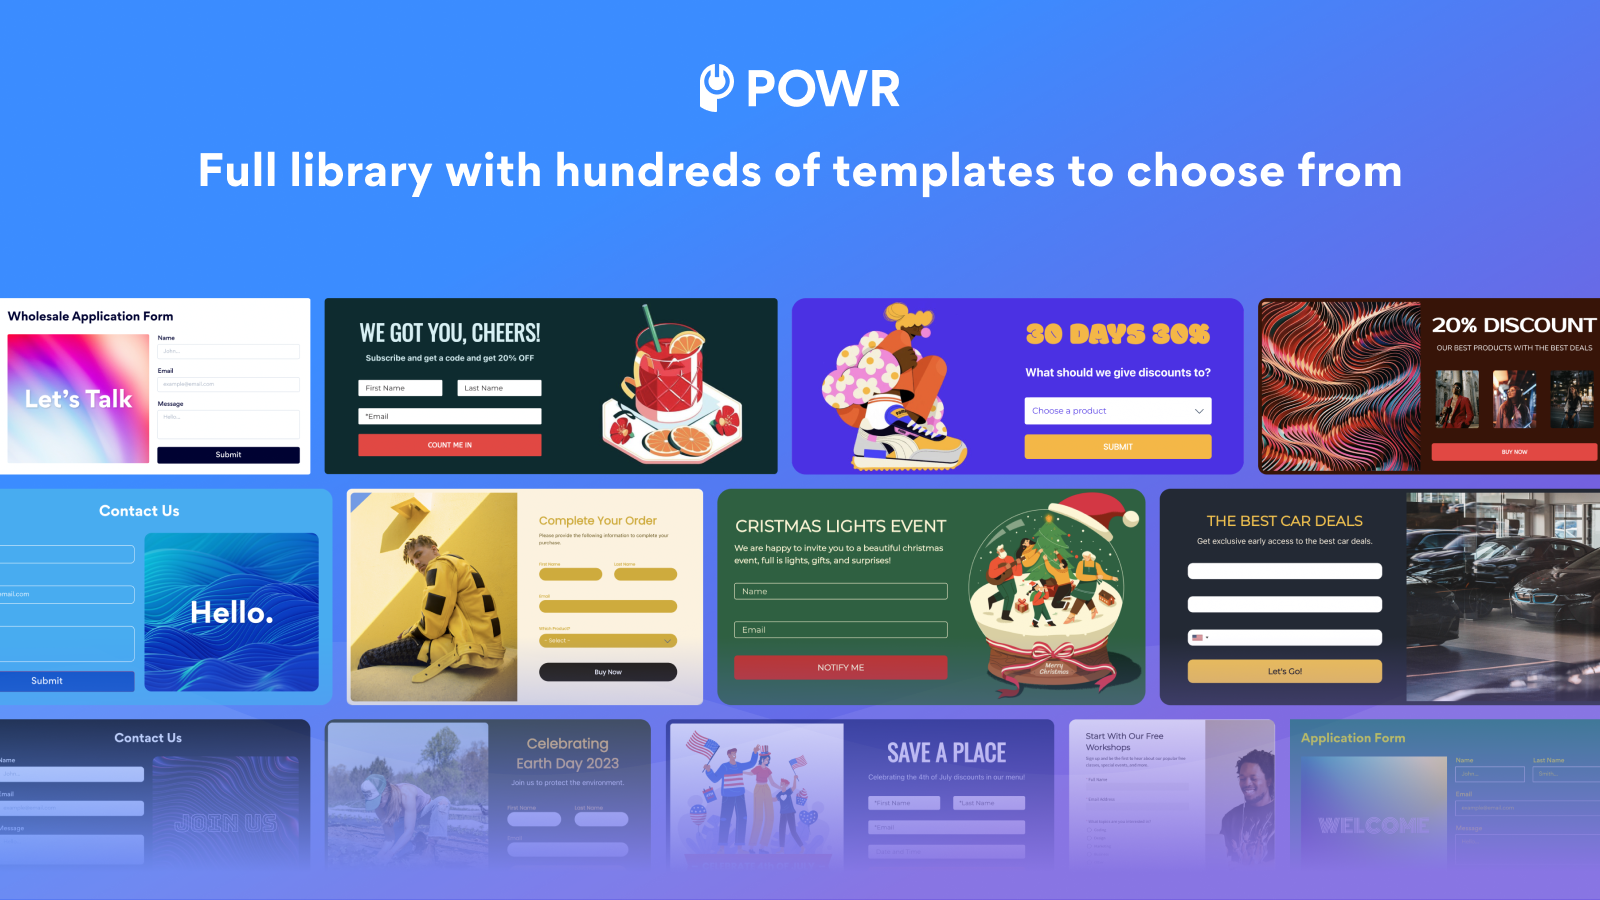 Full library with hundreds of templates to choose from